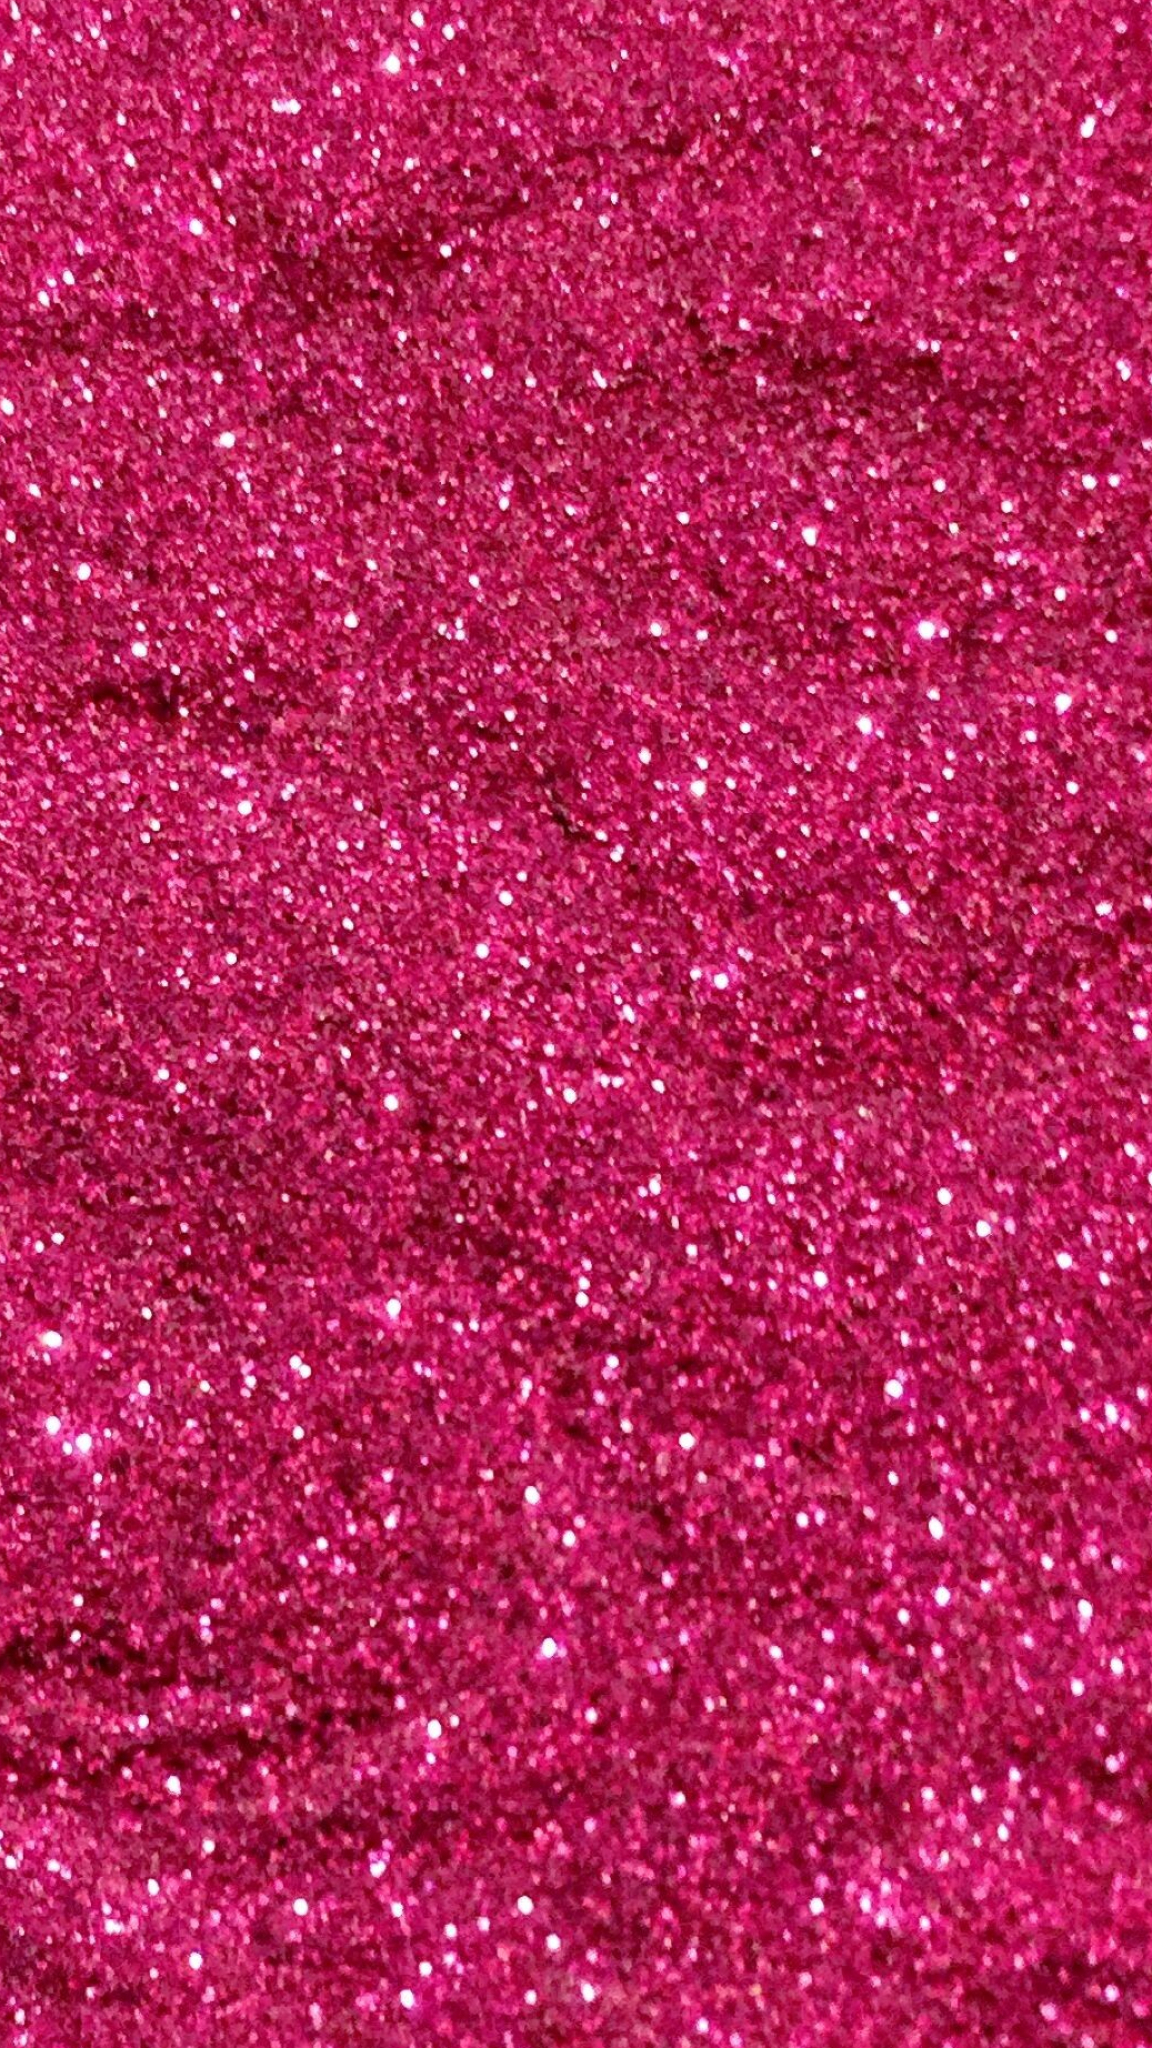 Sparkle: Pink, Used to make gifts look more festive. 1160x2050 HD Background.